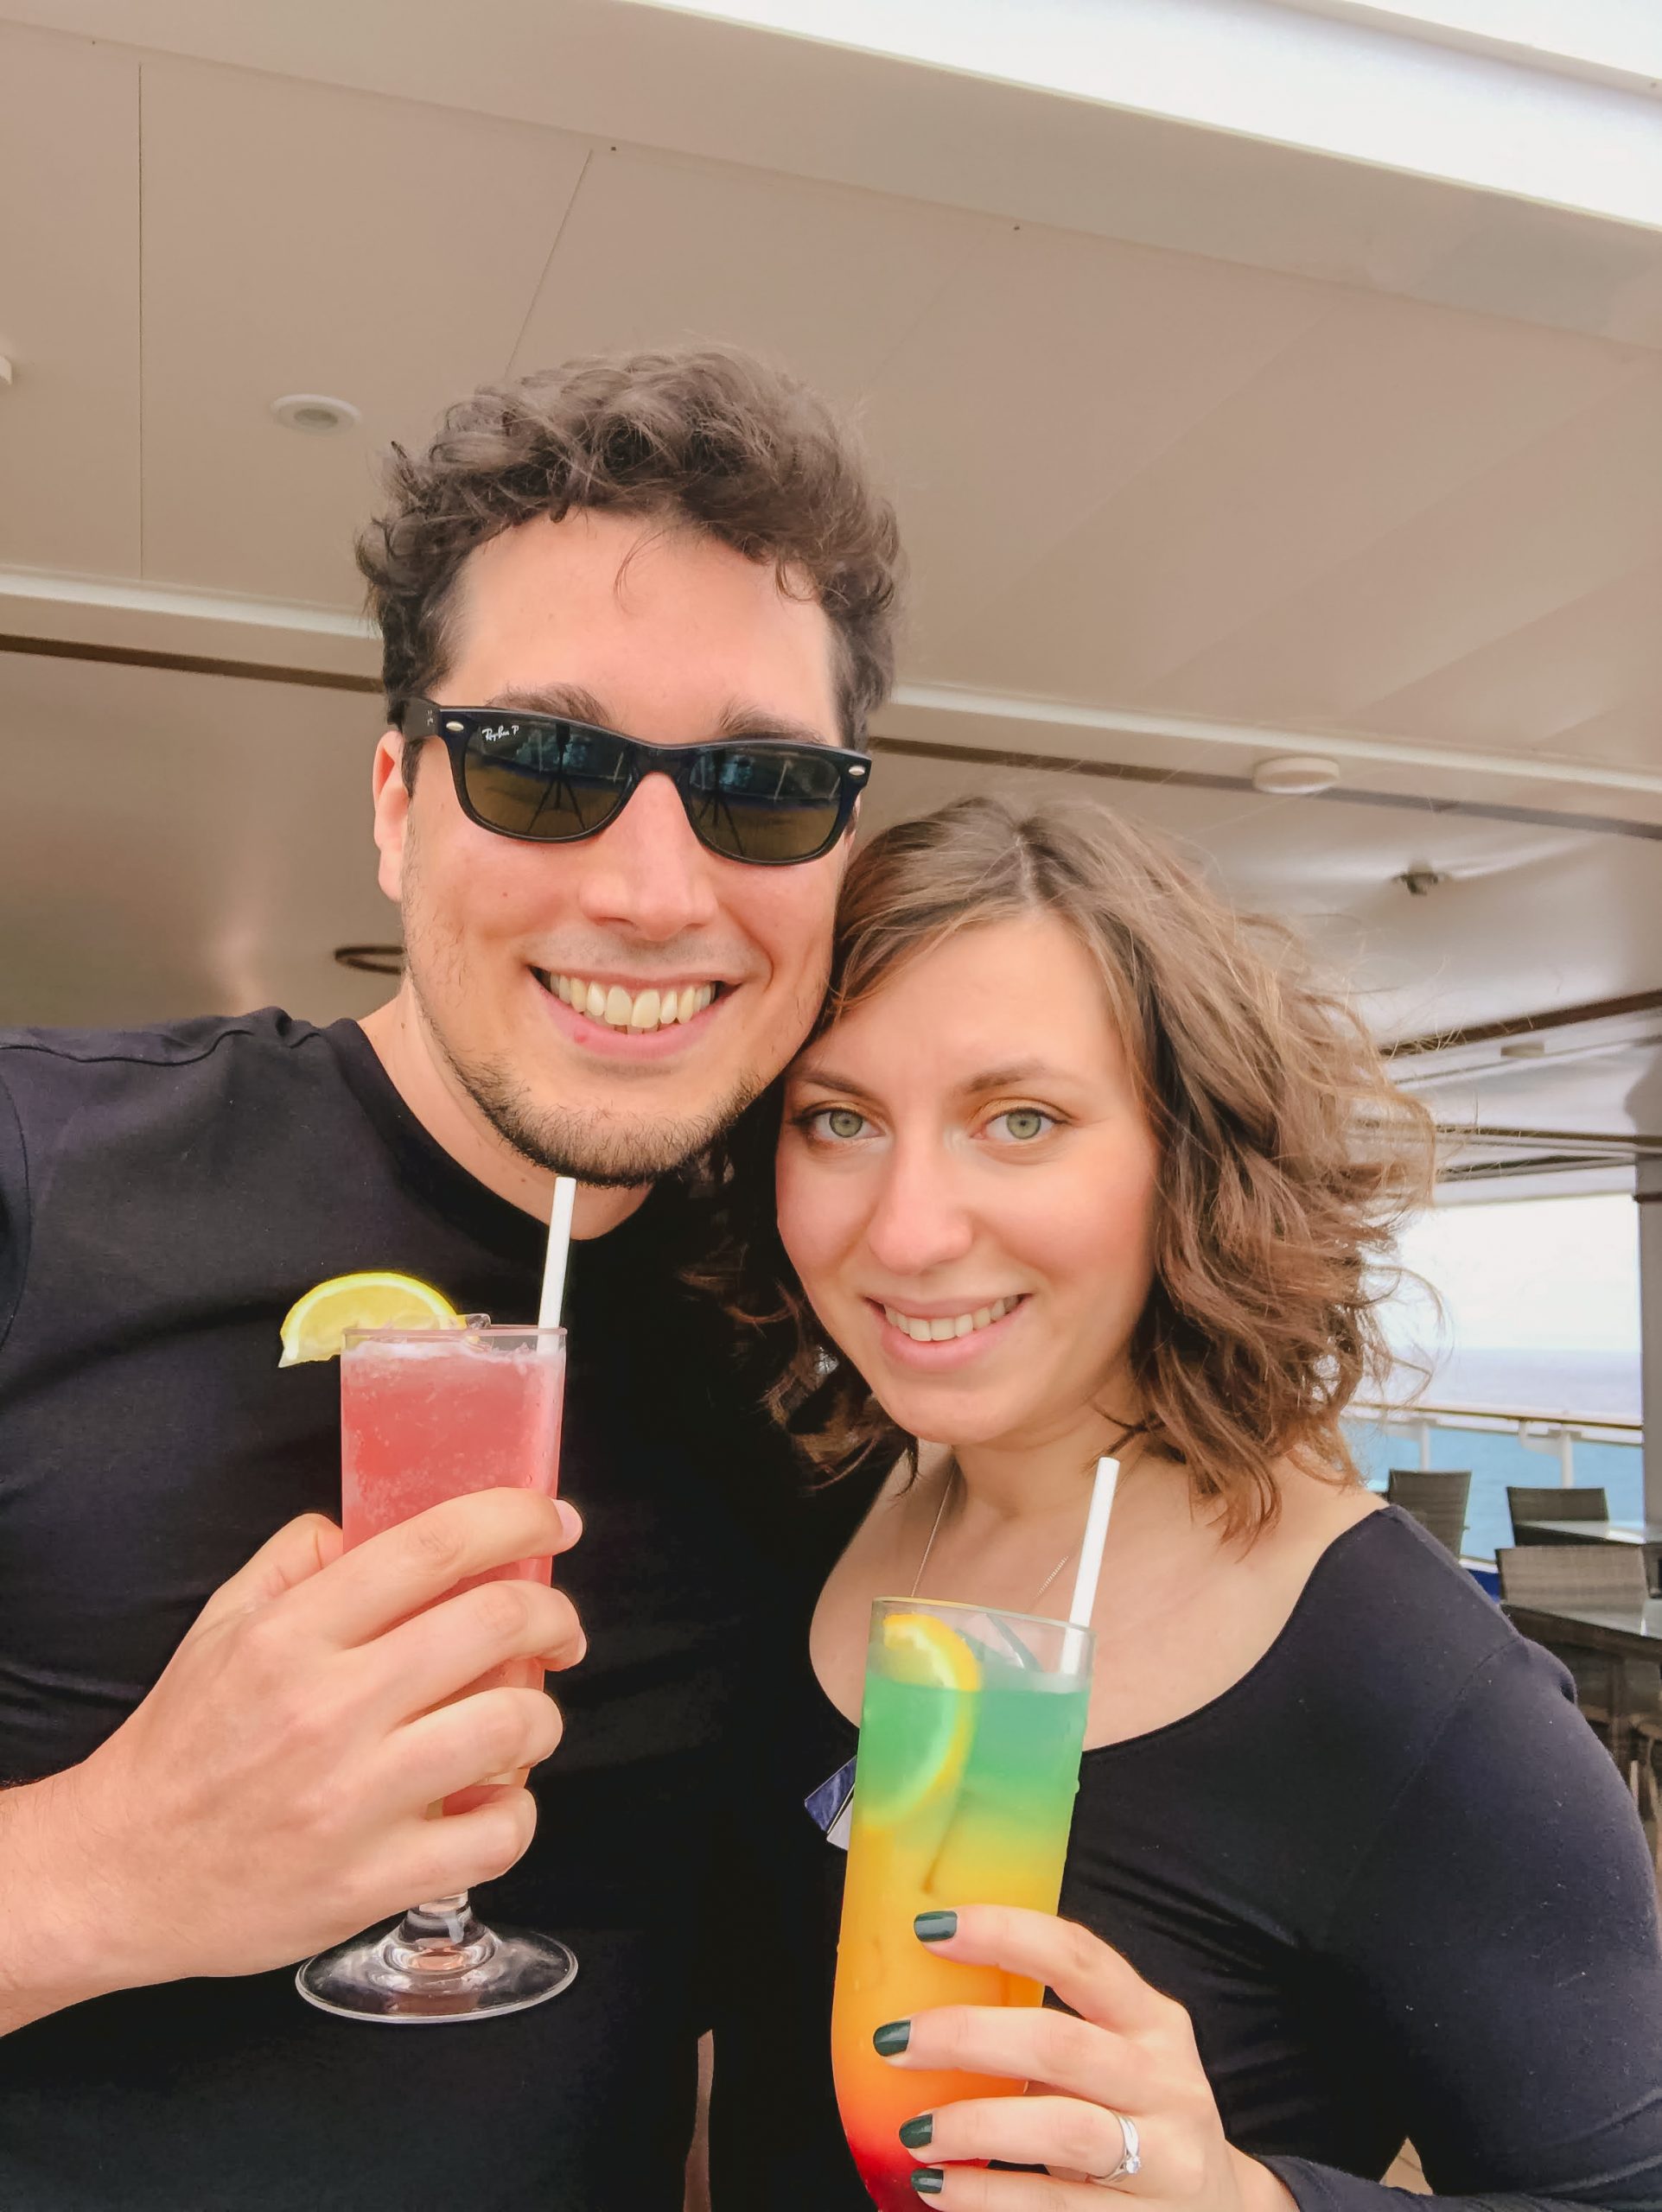 Cory and G sipping cocktails on Princess Cruise